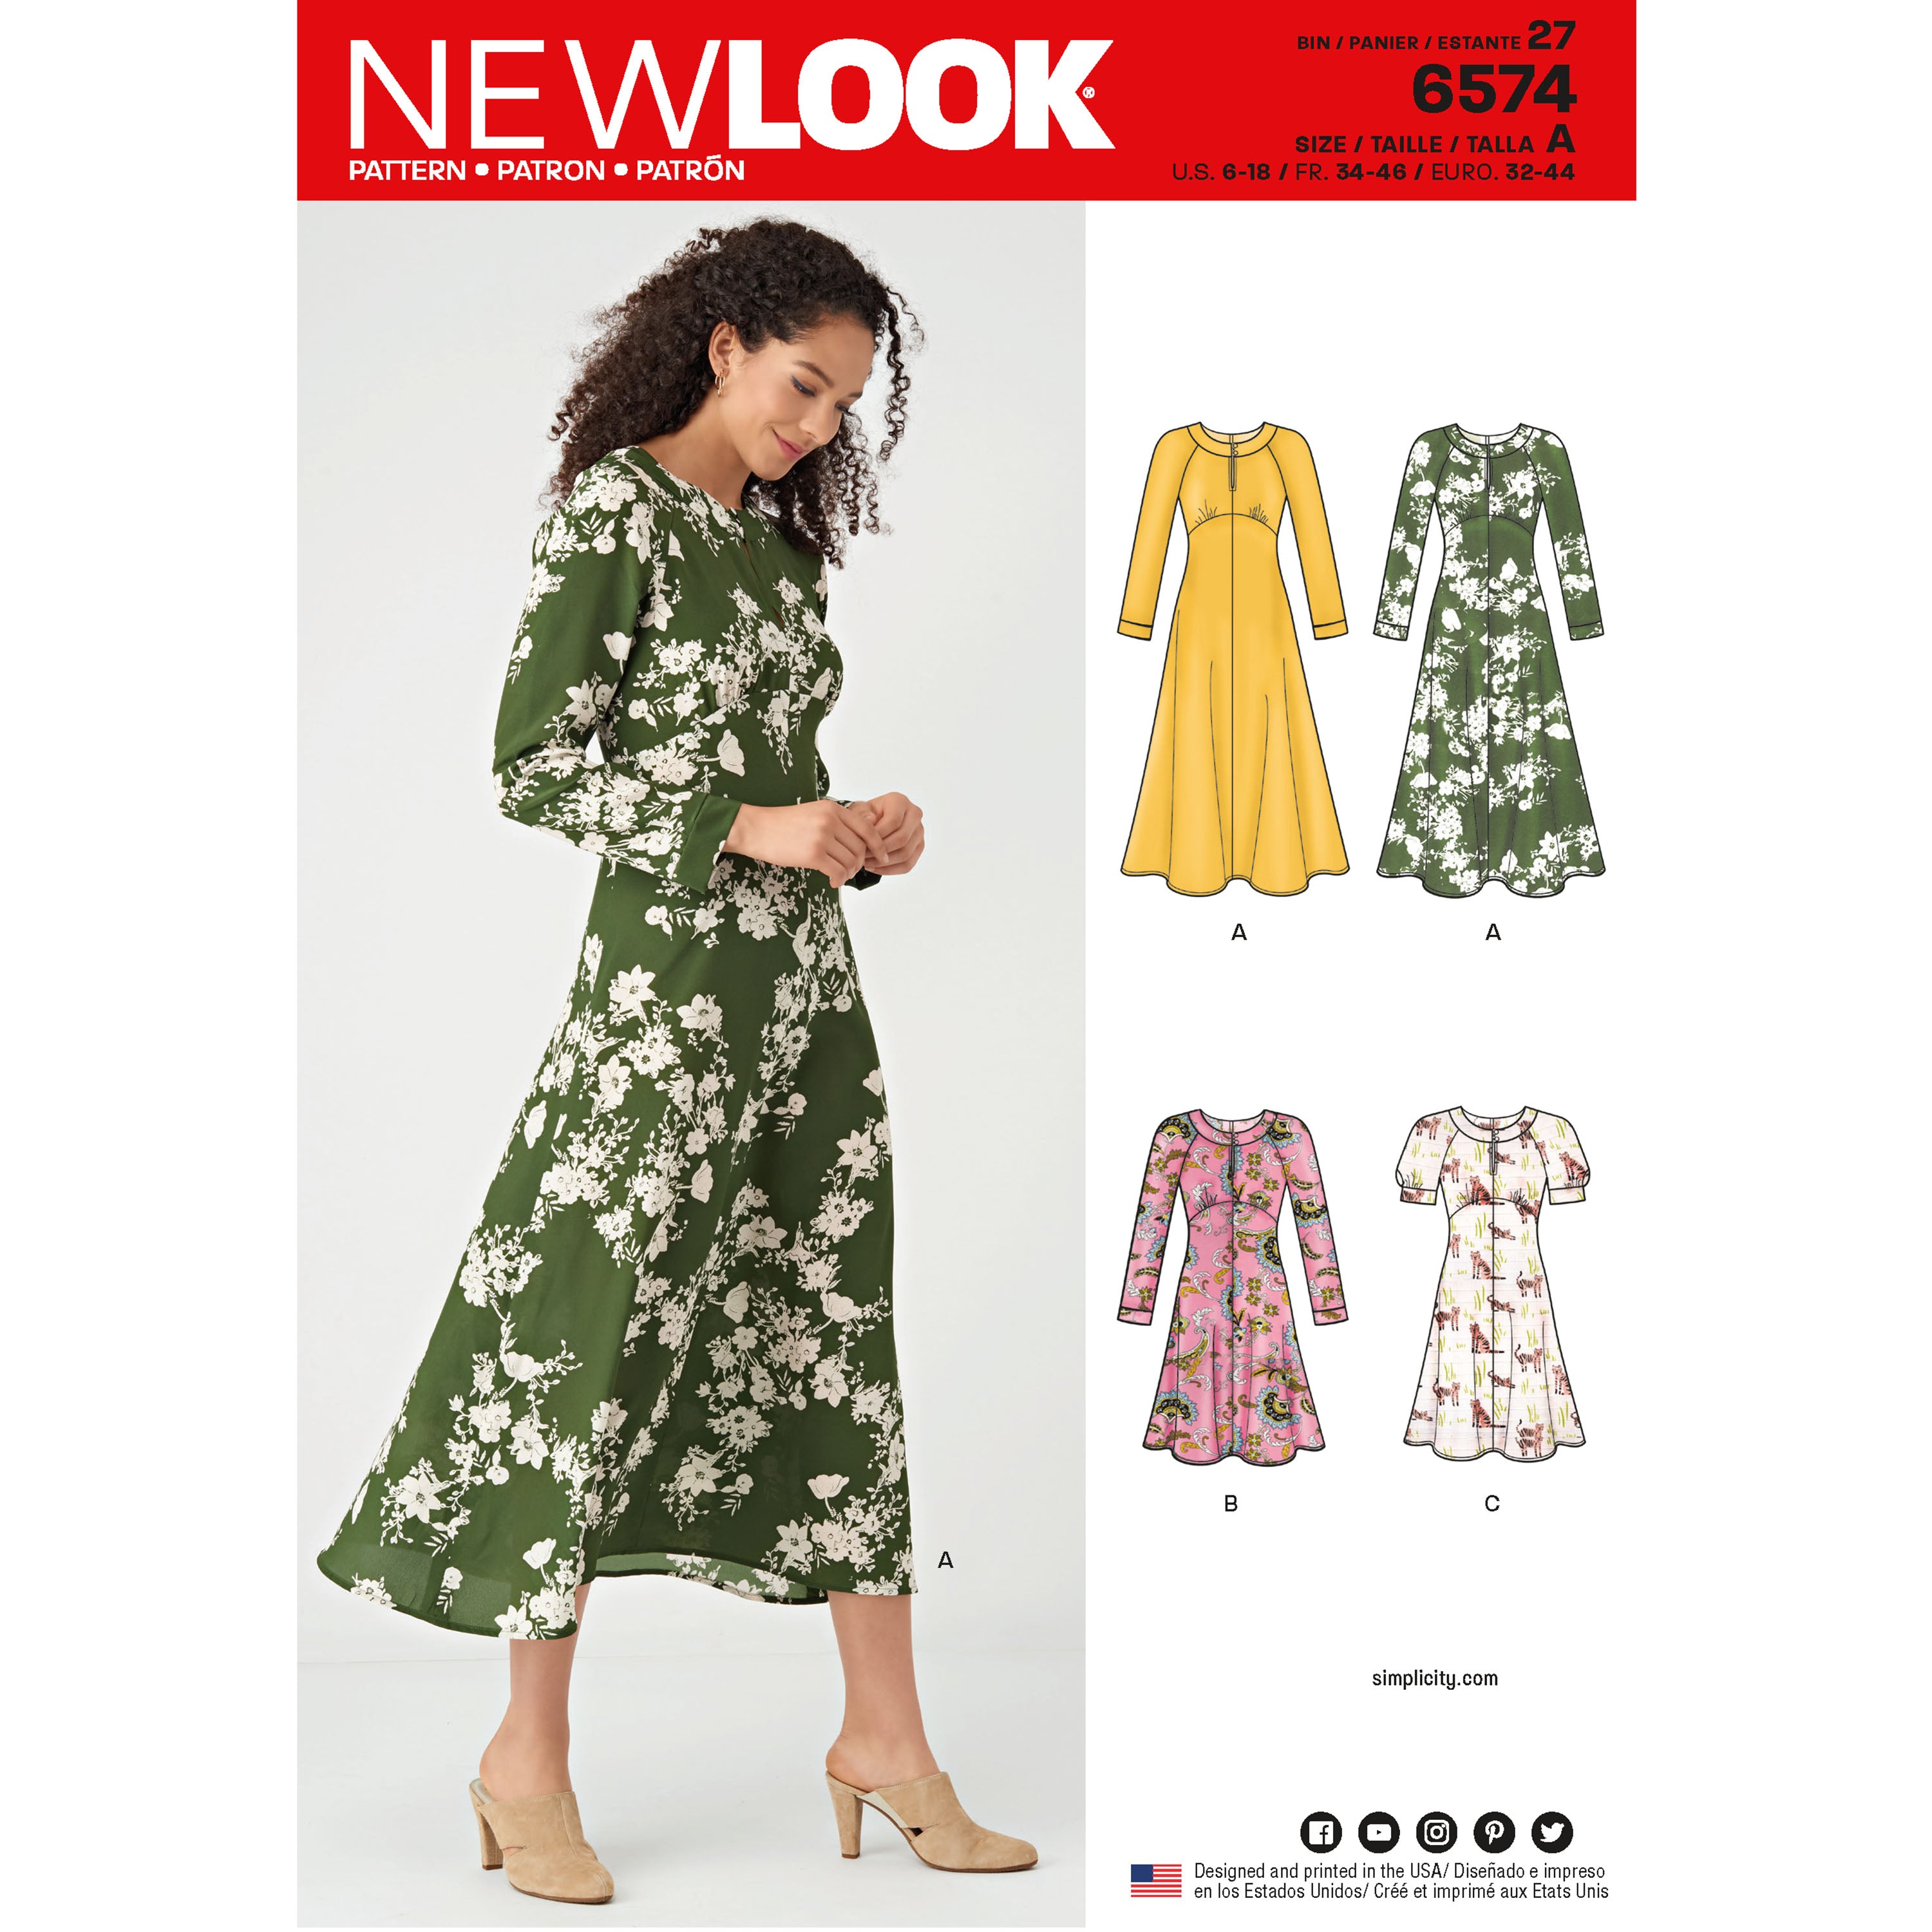 New Look Sewing Pattern 6574 Misses' Dresses My Sewing Box